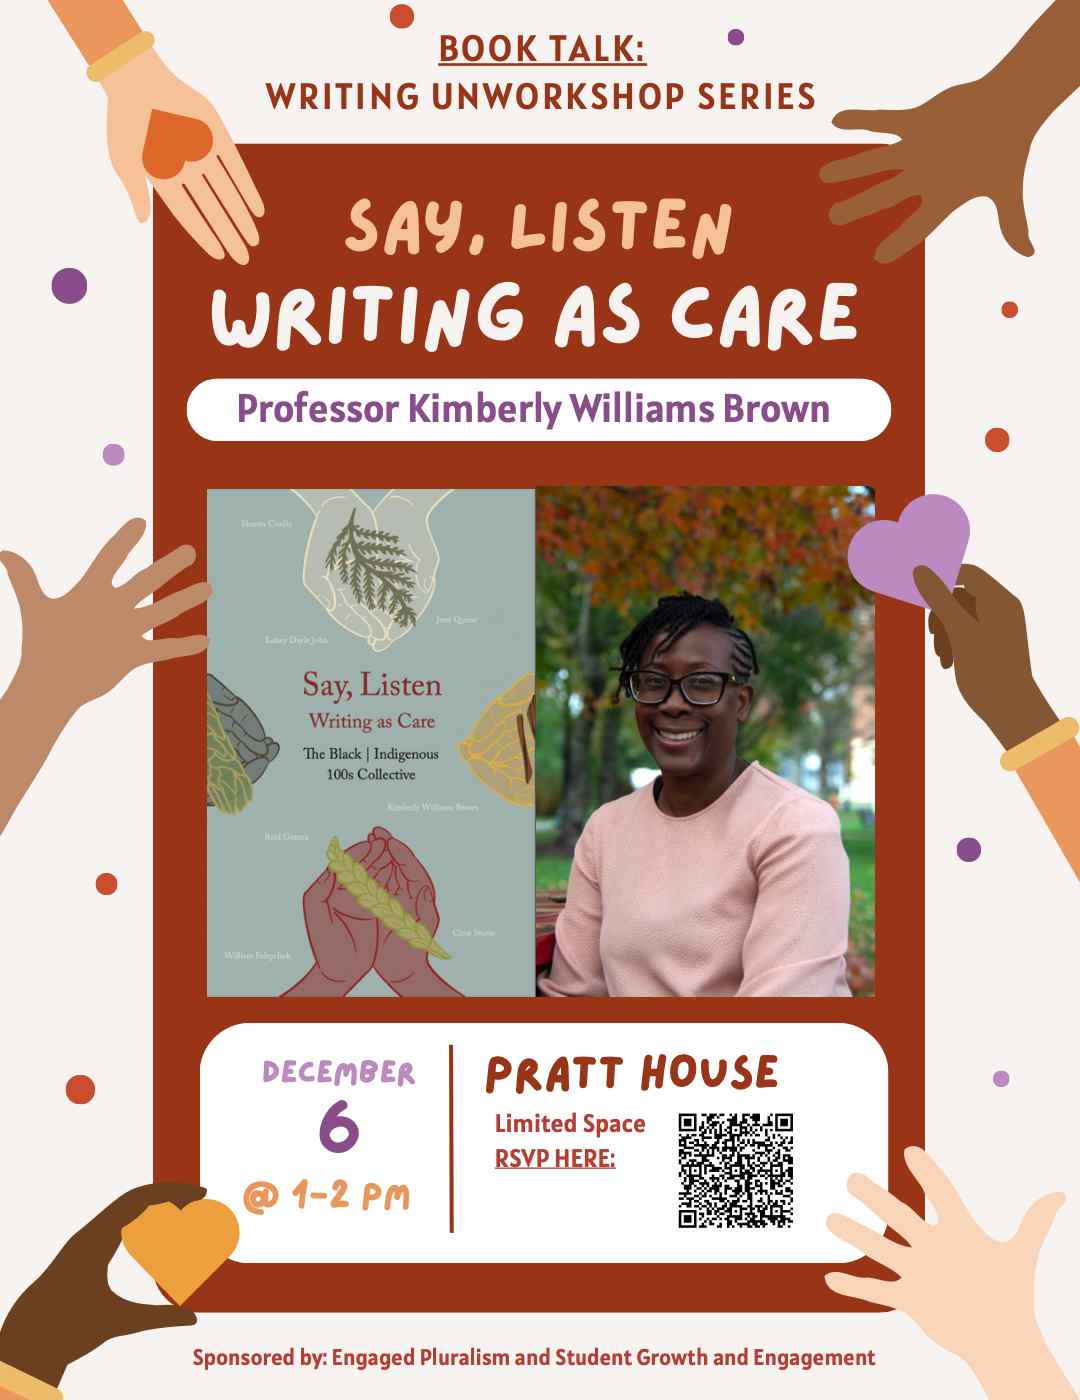 A poster with the text "Say, Listen, Writing as Care. Professor Kimberly Williams Brown".